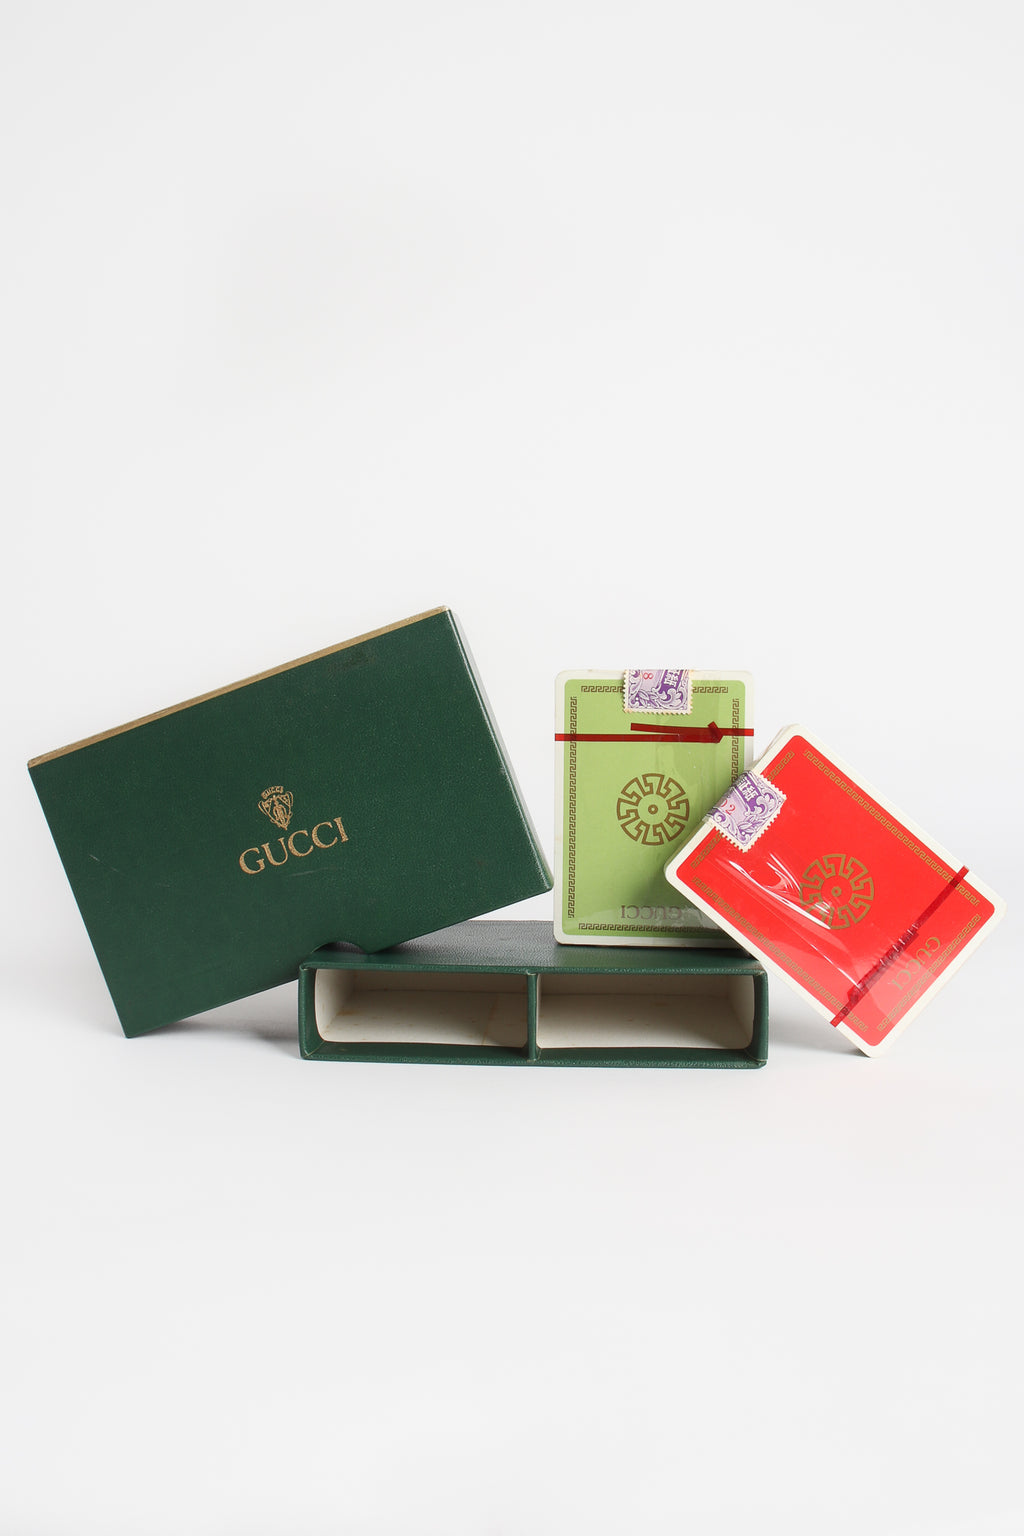 Gucci Playing Cards